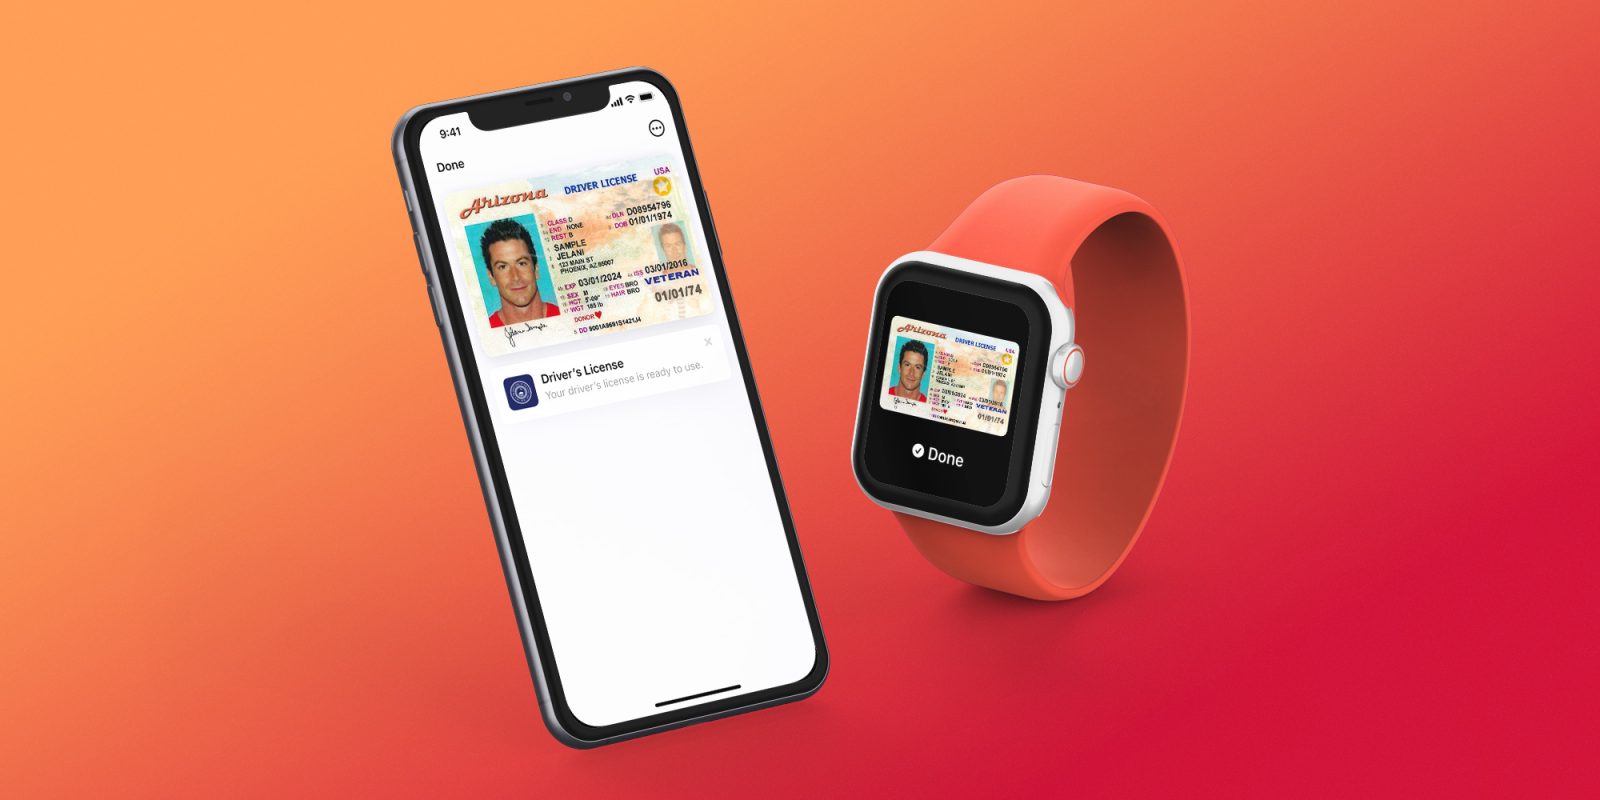 How Apple digital IDs work - everything you need to know